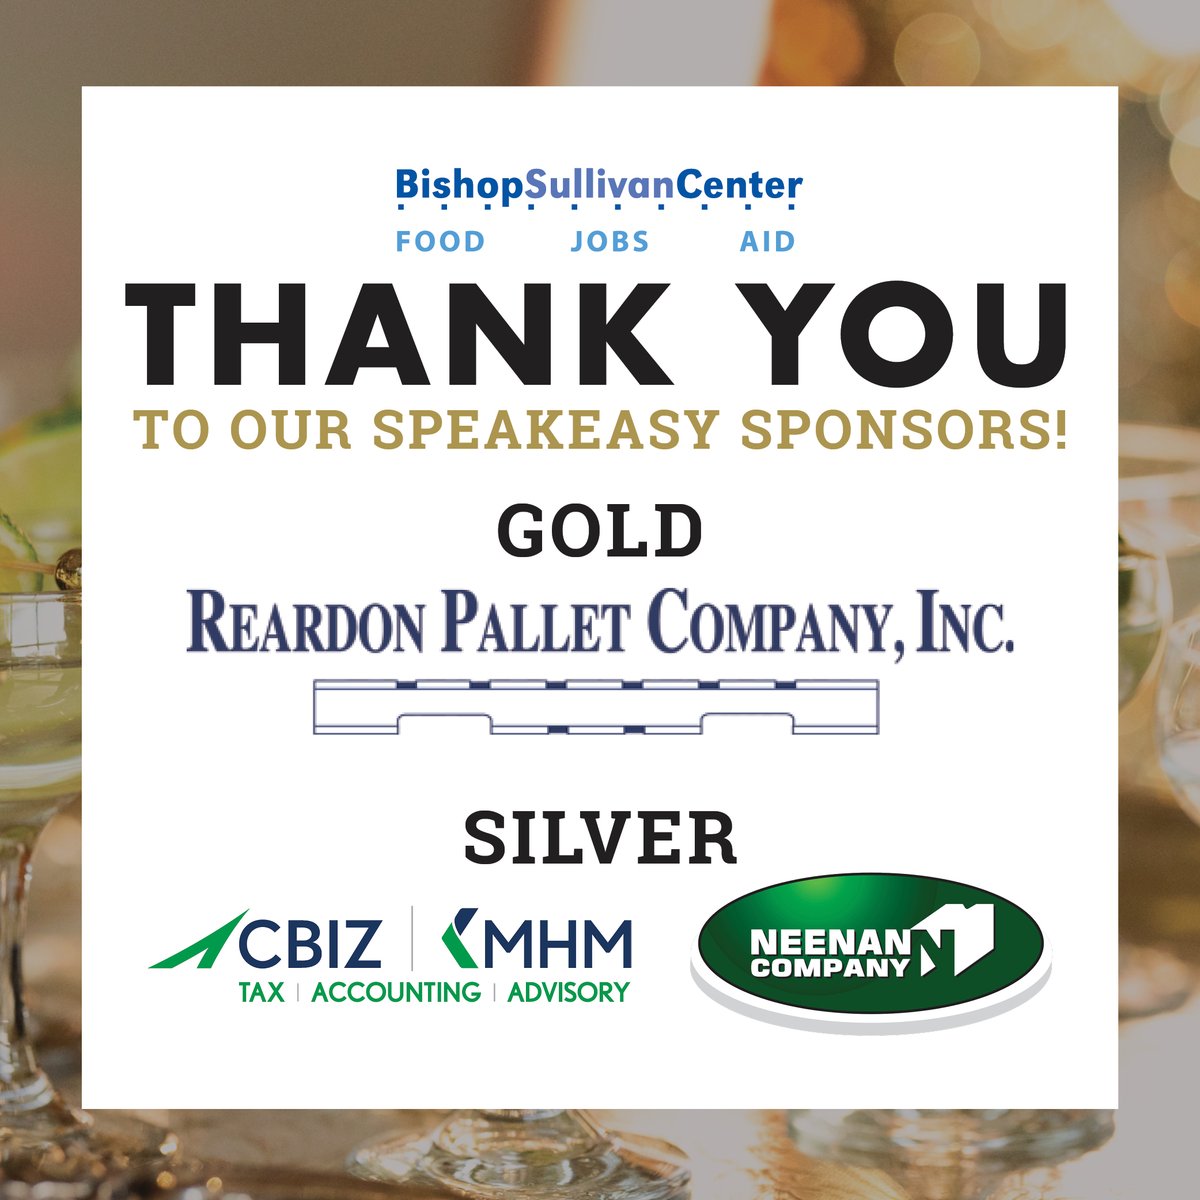 A big thank you to all of our generous Speakeasy sponsors, especially our Gold Sponsors, Reardon Pallet Company, and our Silver Sponsors, @CBIZKansasCity and Neenan Company. Your support is helping us meet the need for neighbors facing hardship. We are grateful for you!